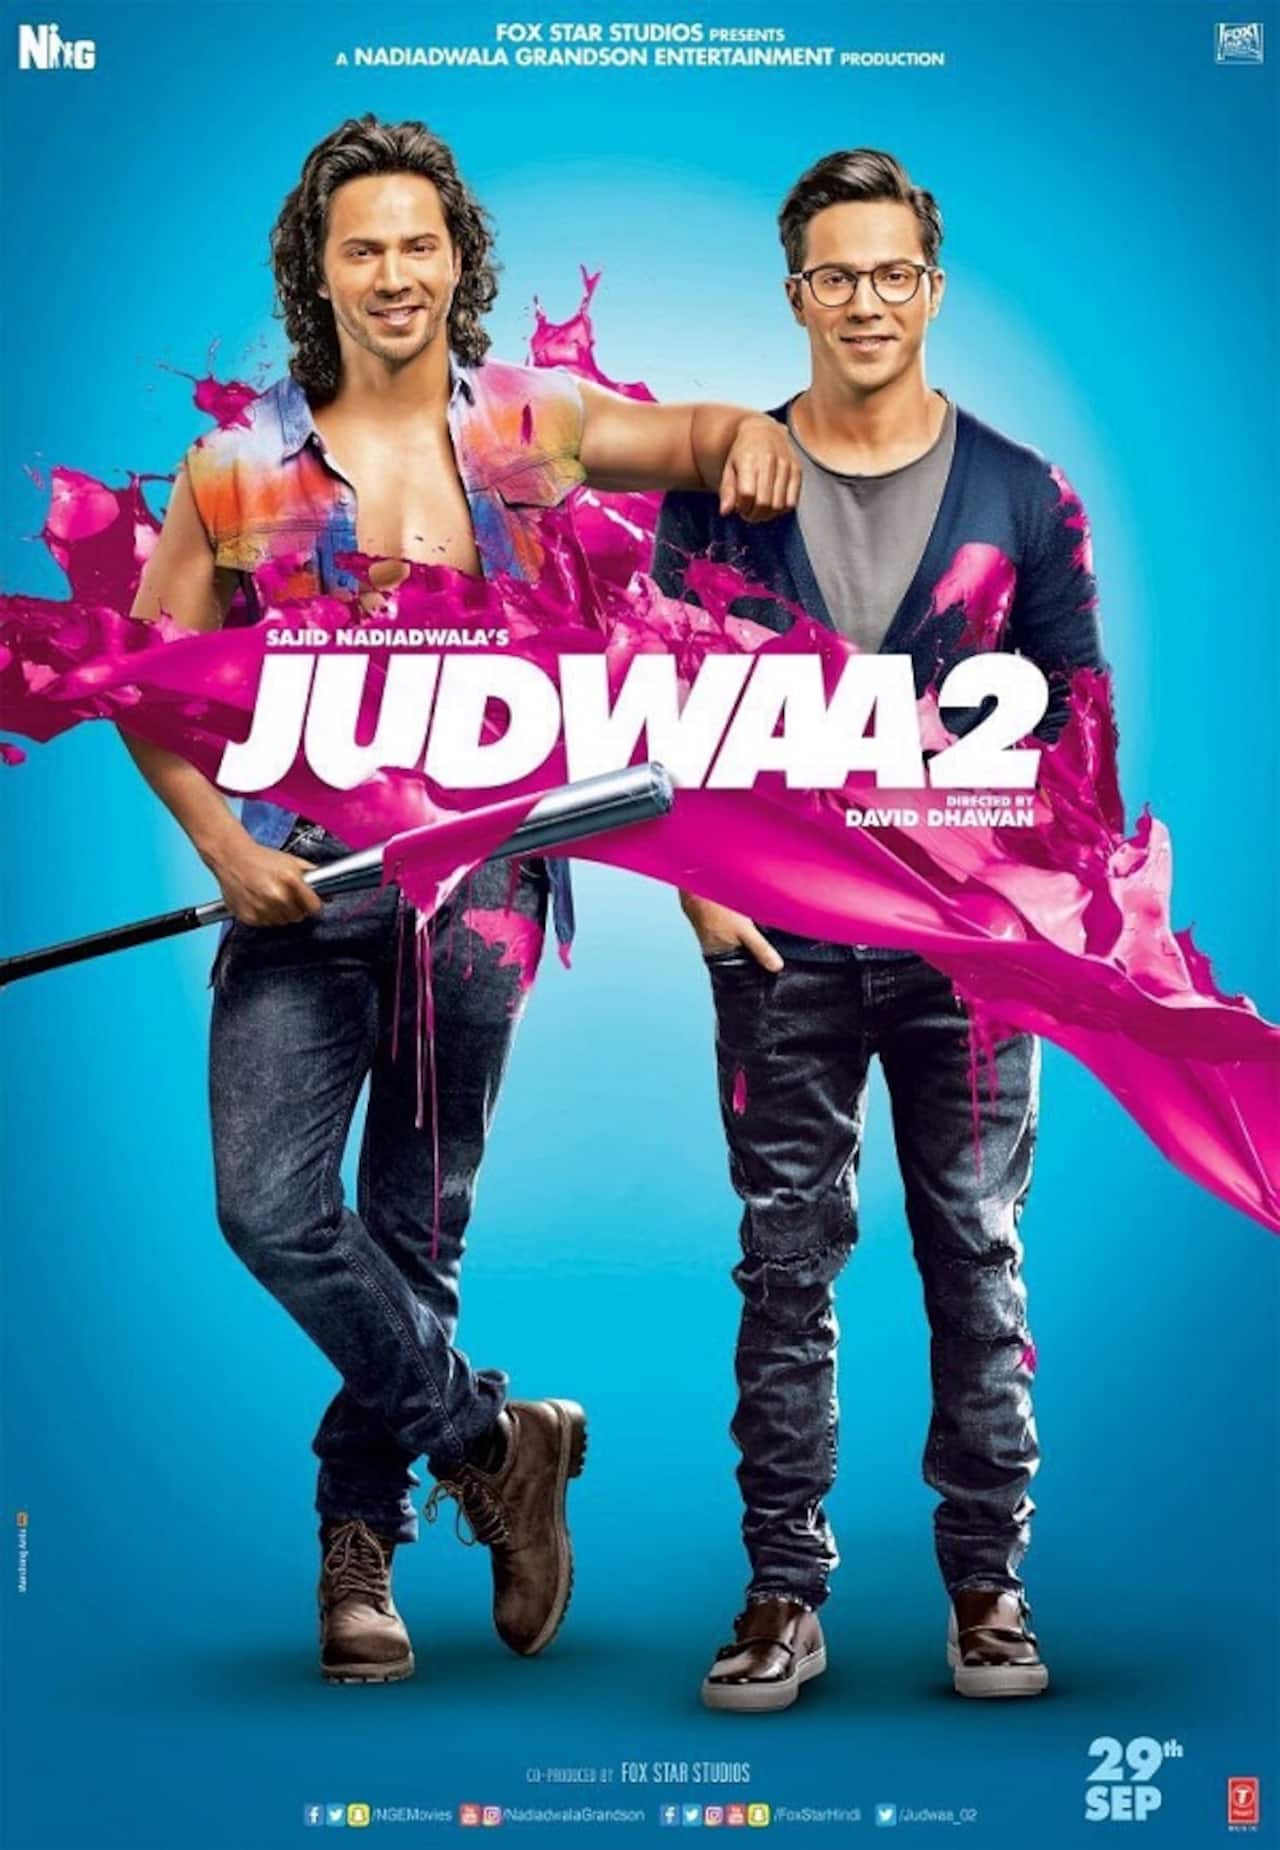 Judwaa 2’s new poster is a trip down the memory lane for Varun Dhawan – here’s how